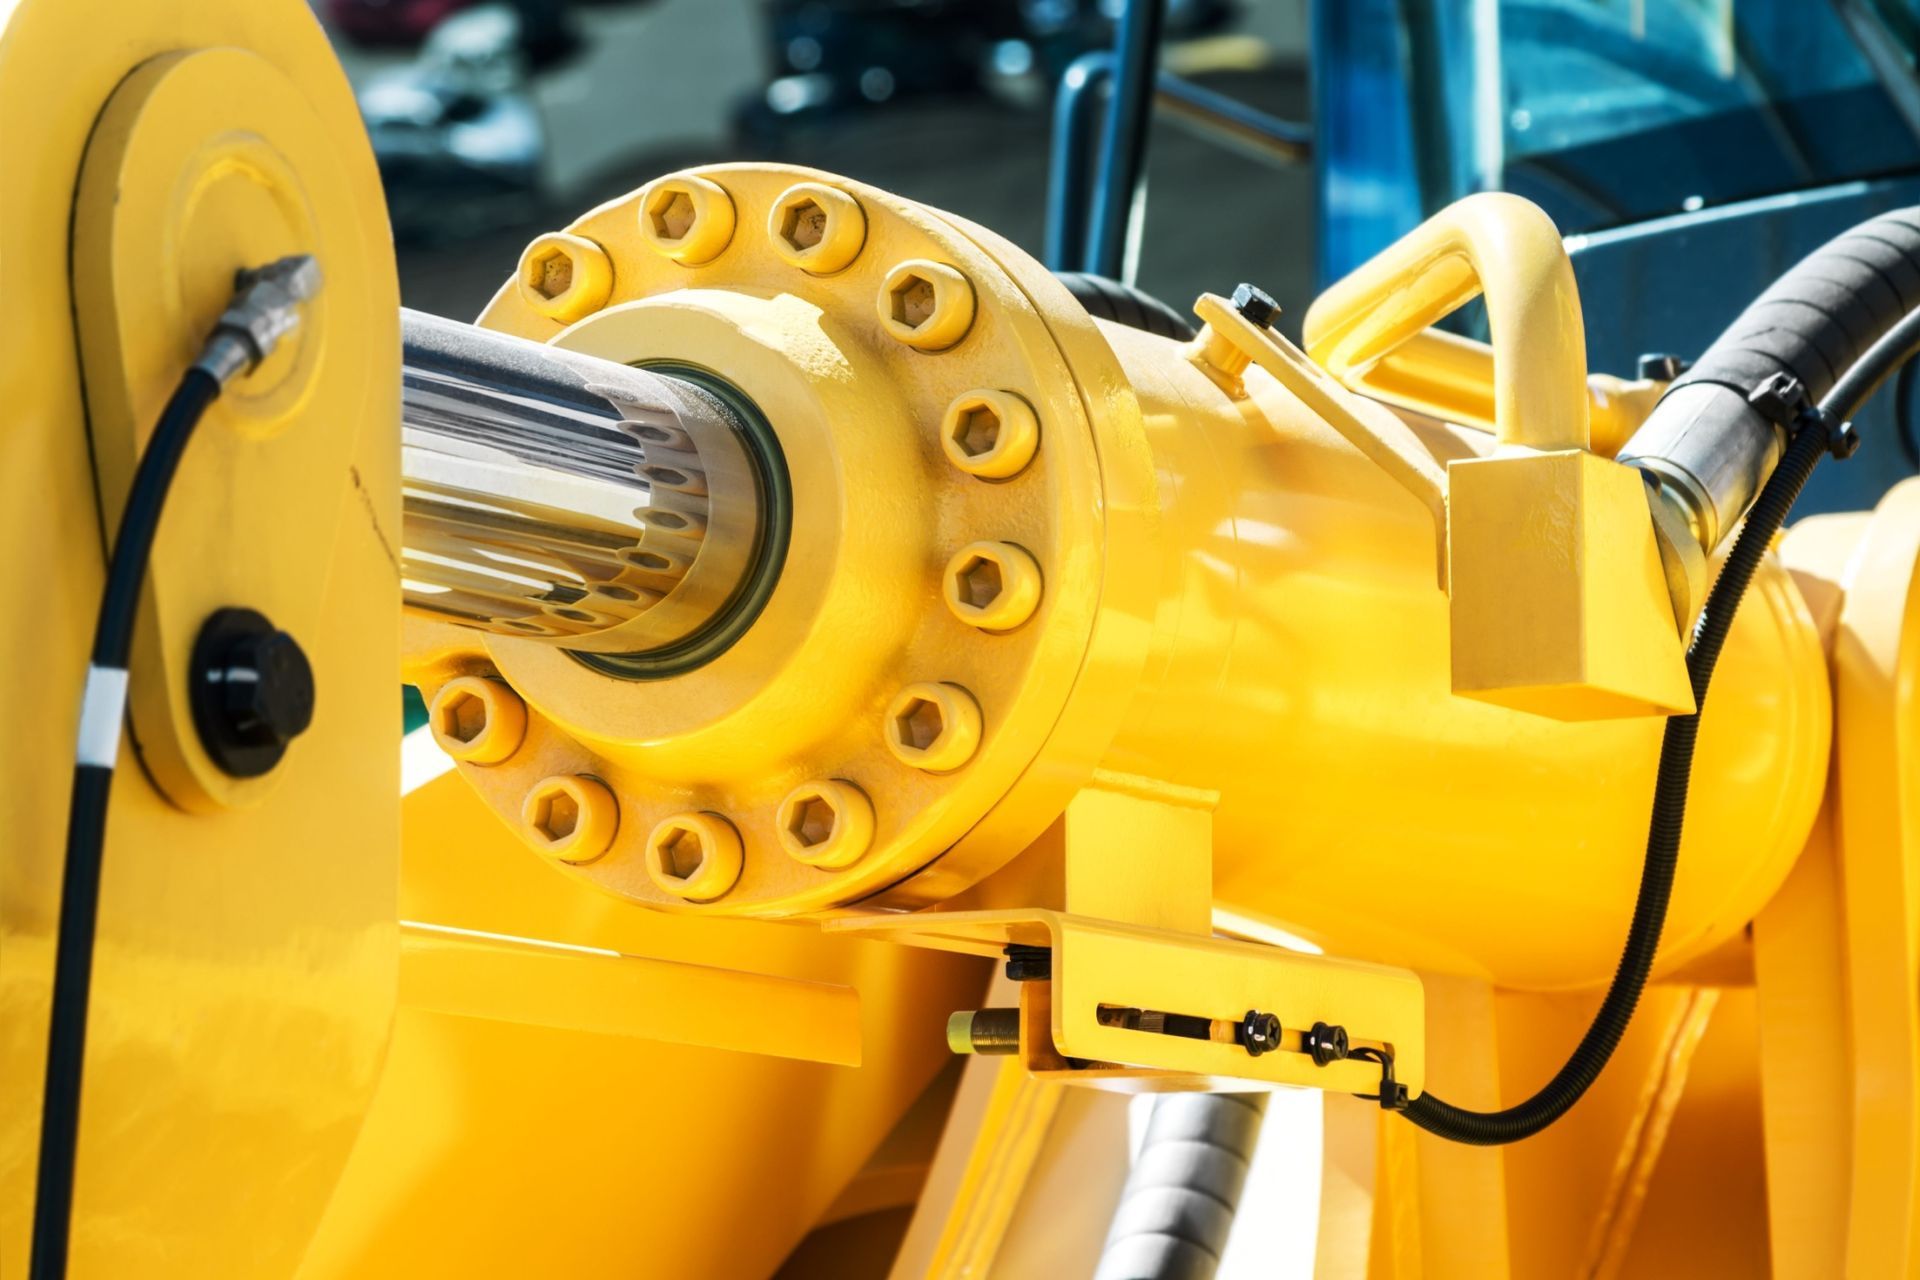 A close up of a yellow hydraulic cylinder on a machine.